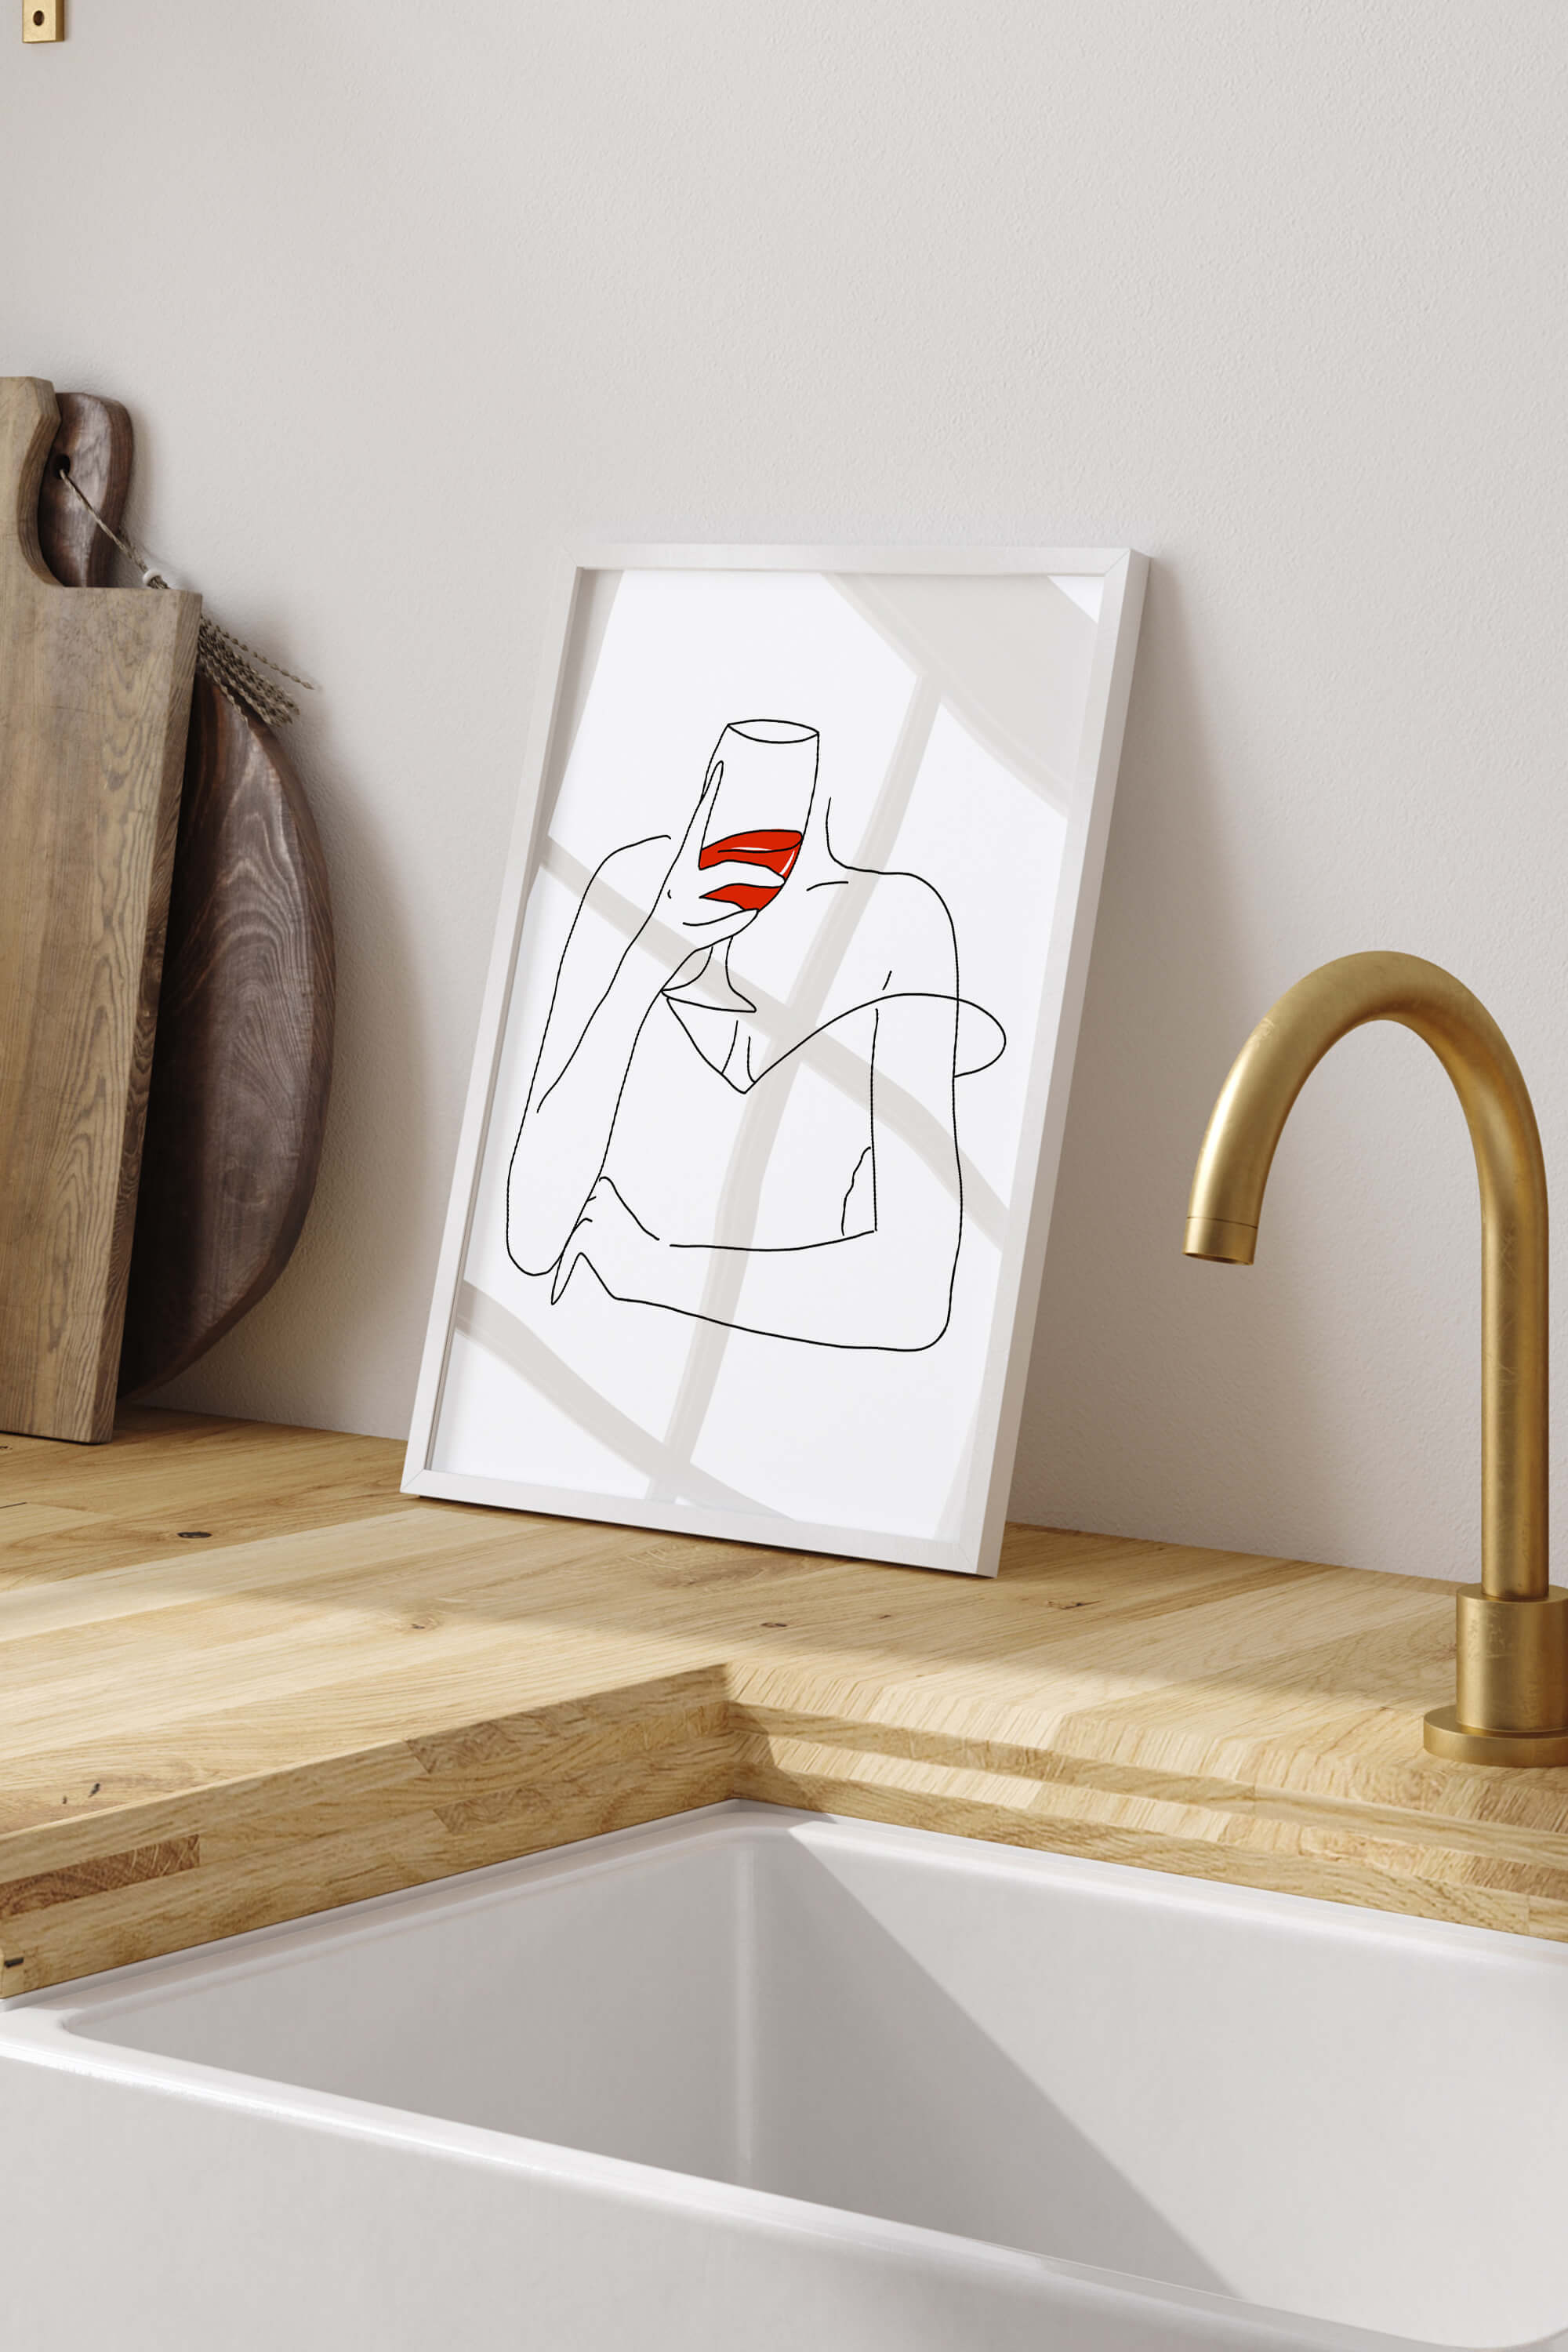 Bold black and red line drawing depicting the essence of wine, a striking addition to contemporary wall art.